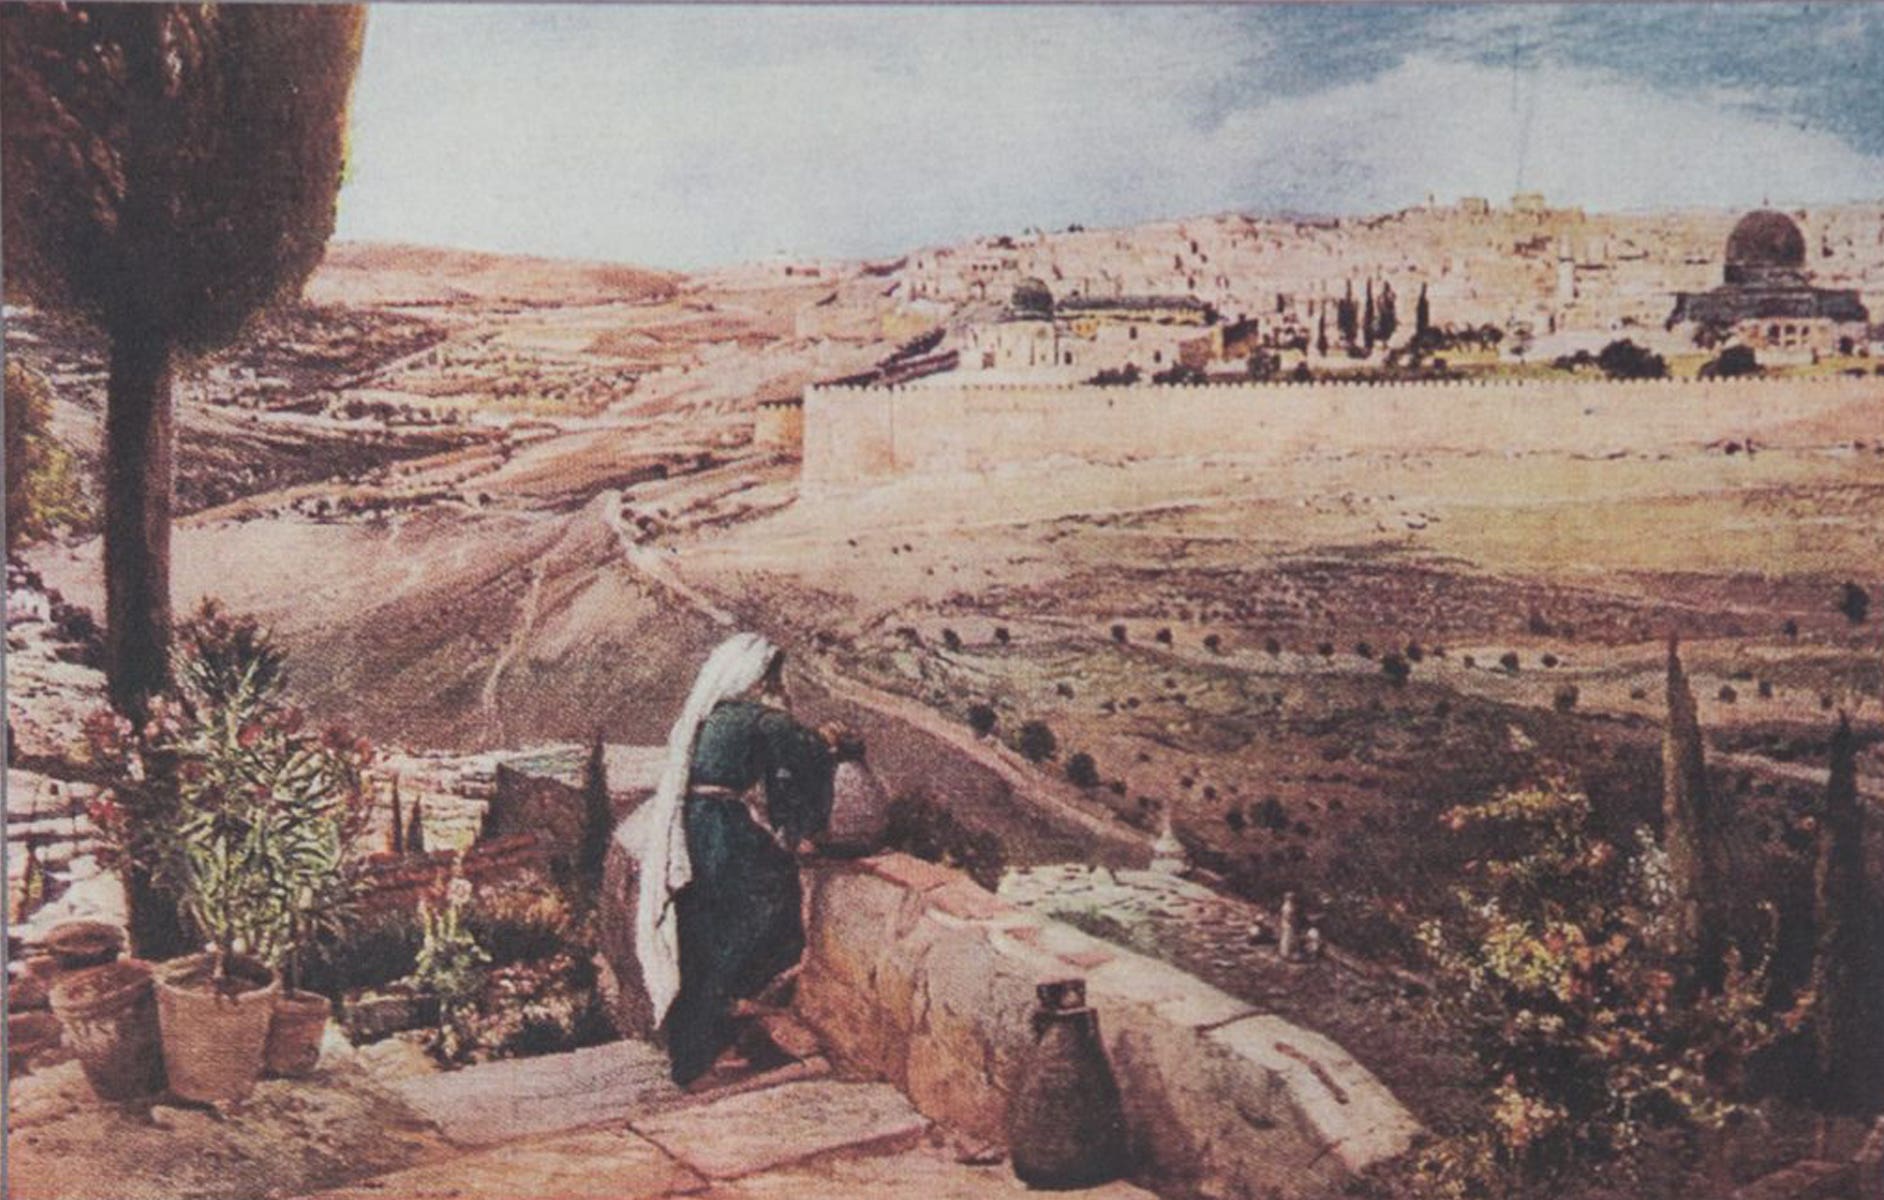 An illustration from 19th-century guidebooks to pre-state Palestine.
